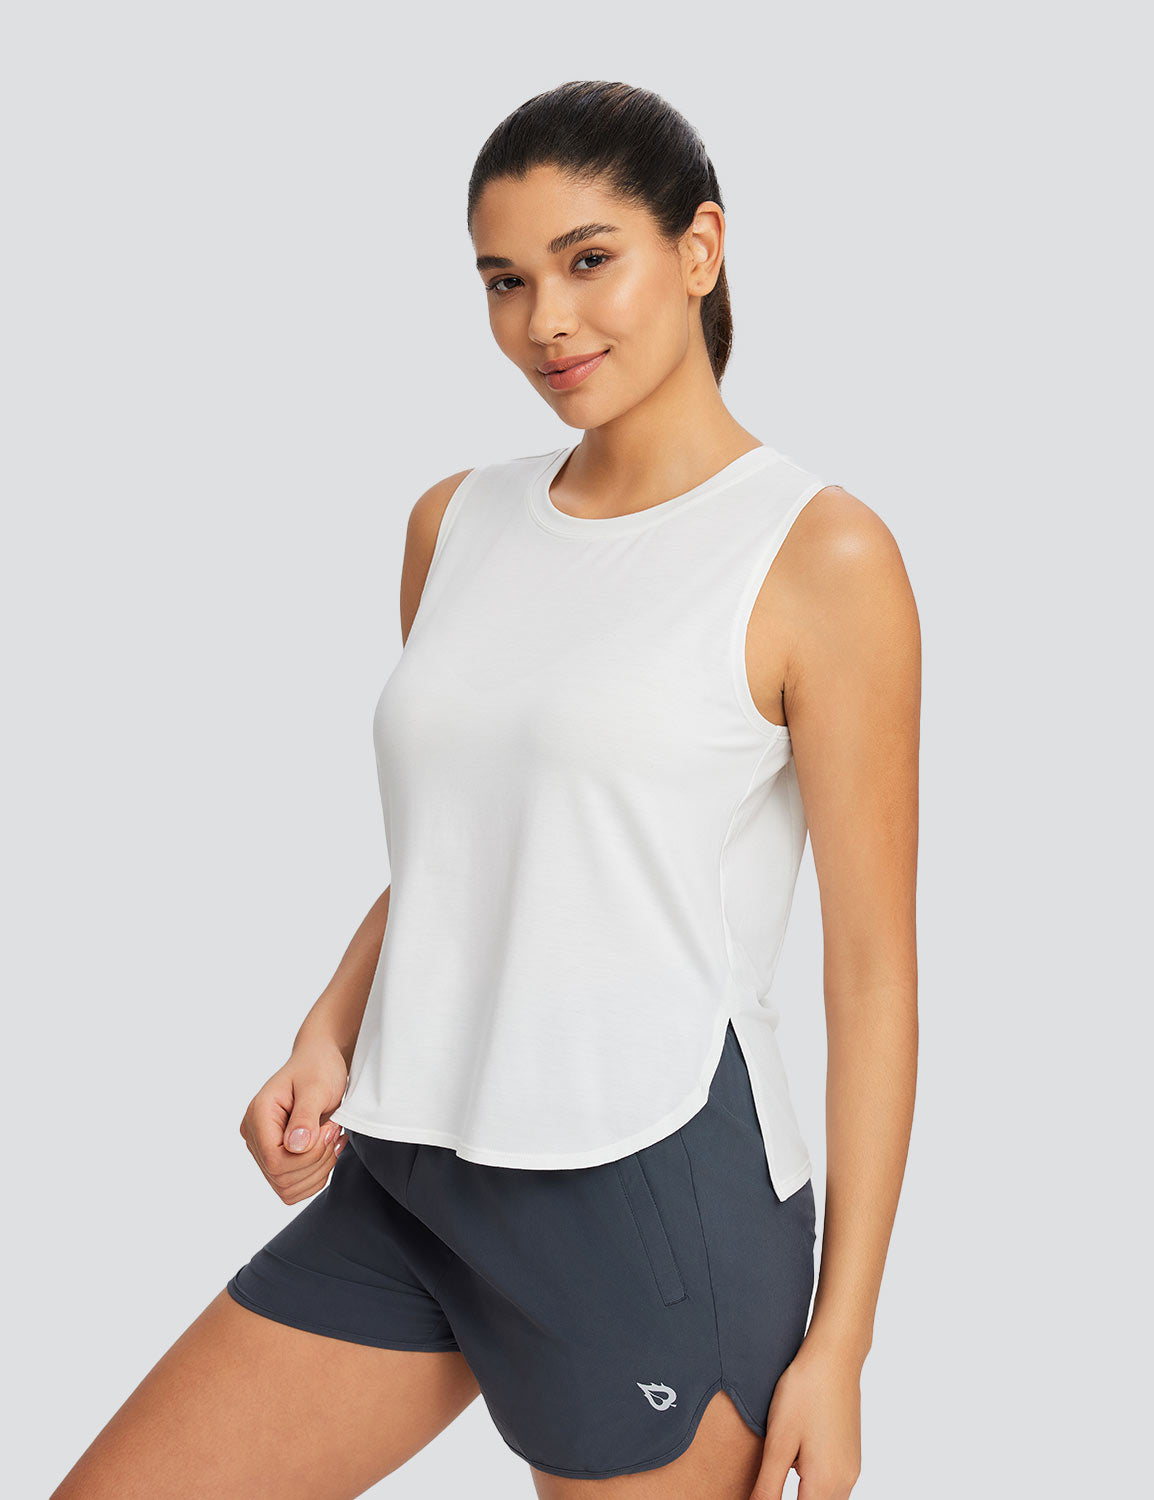 Baleaf Women's Quick Dry Crew Neck Tank Top Lucent White Side